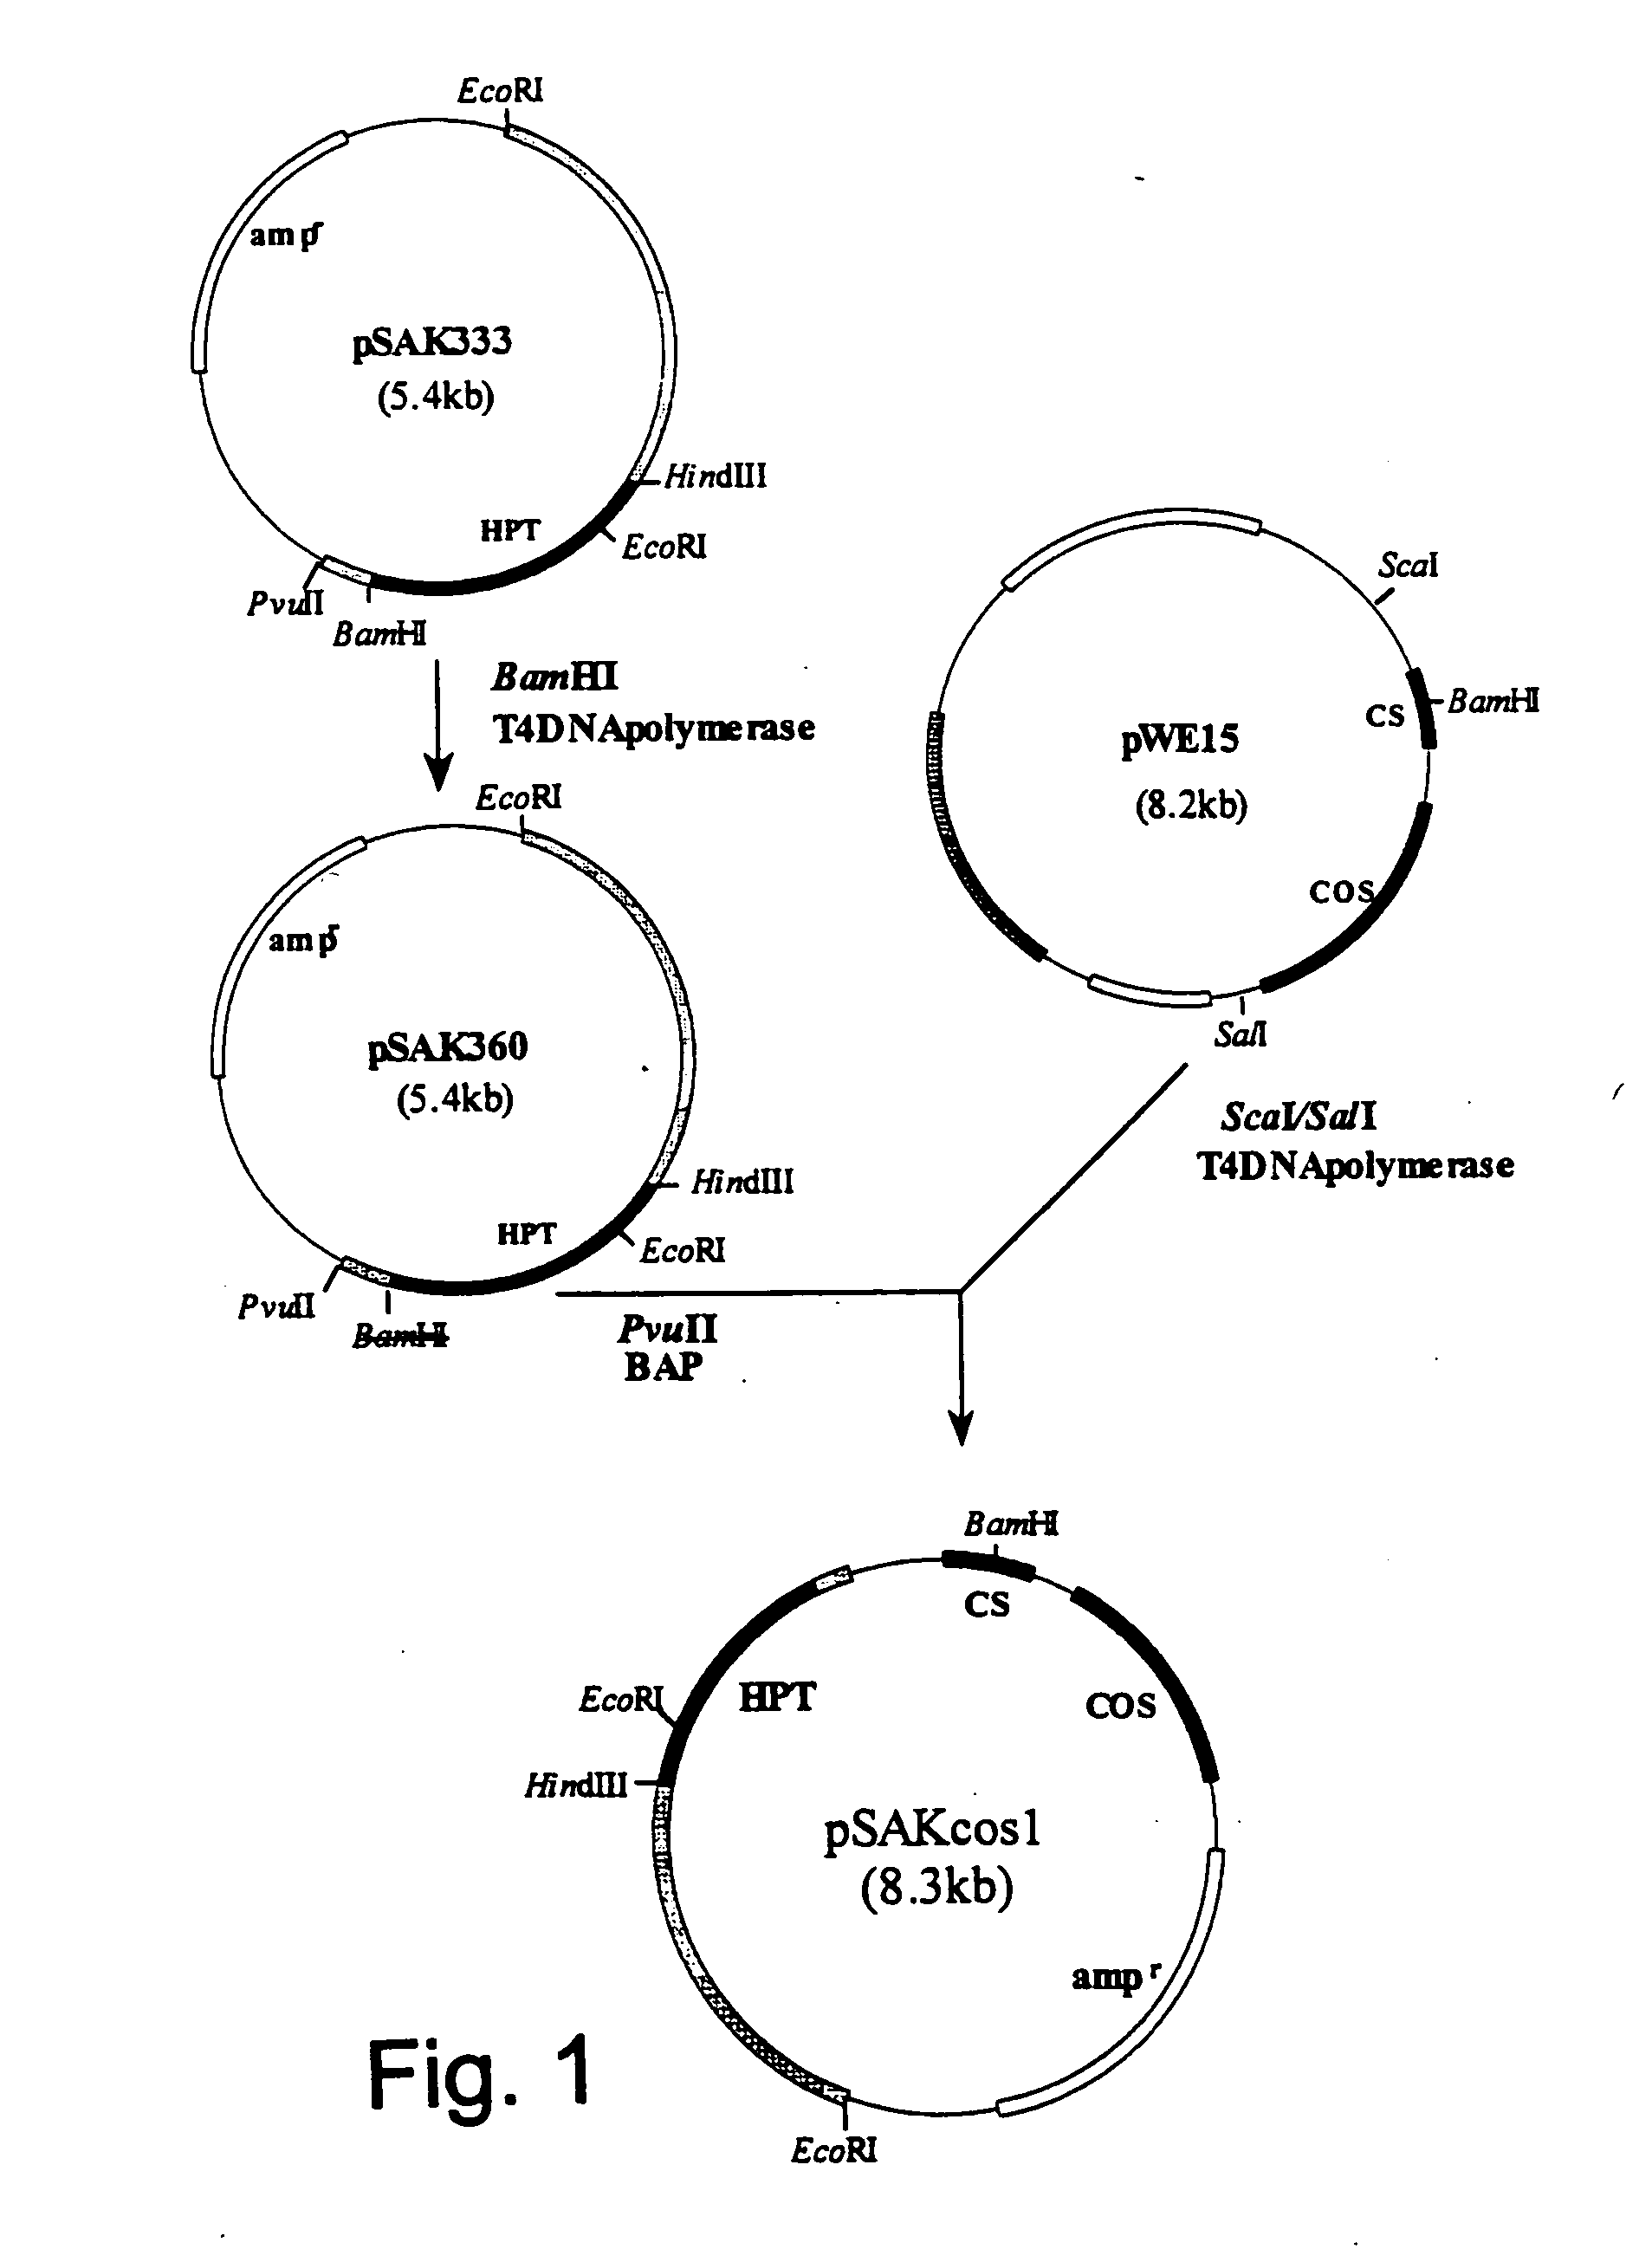 Genes from a gene cluster